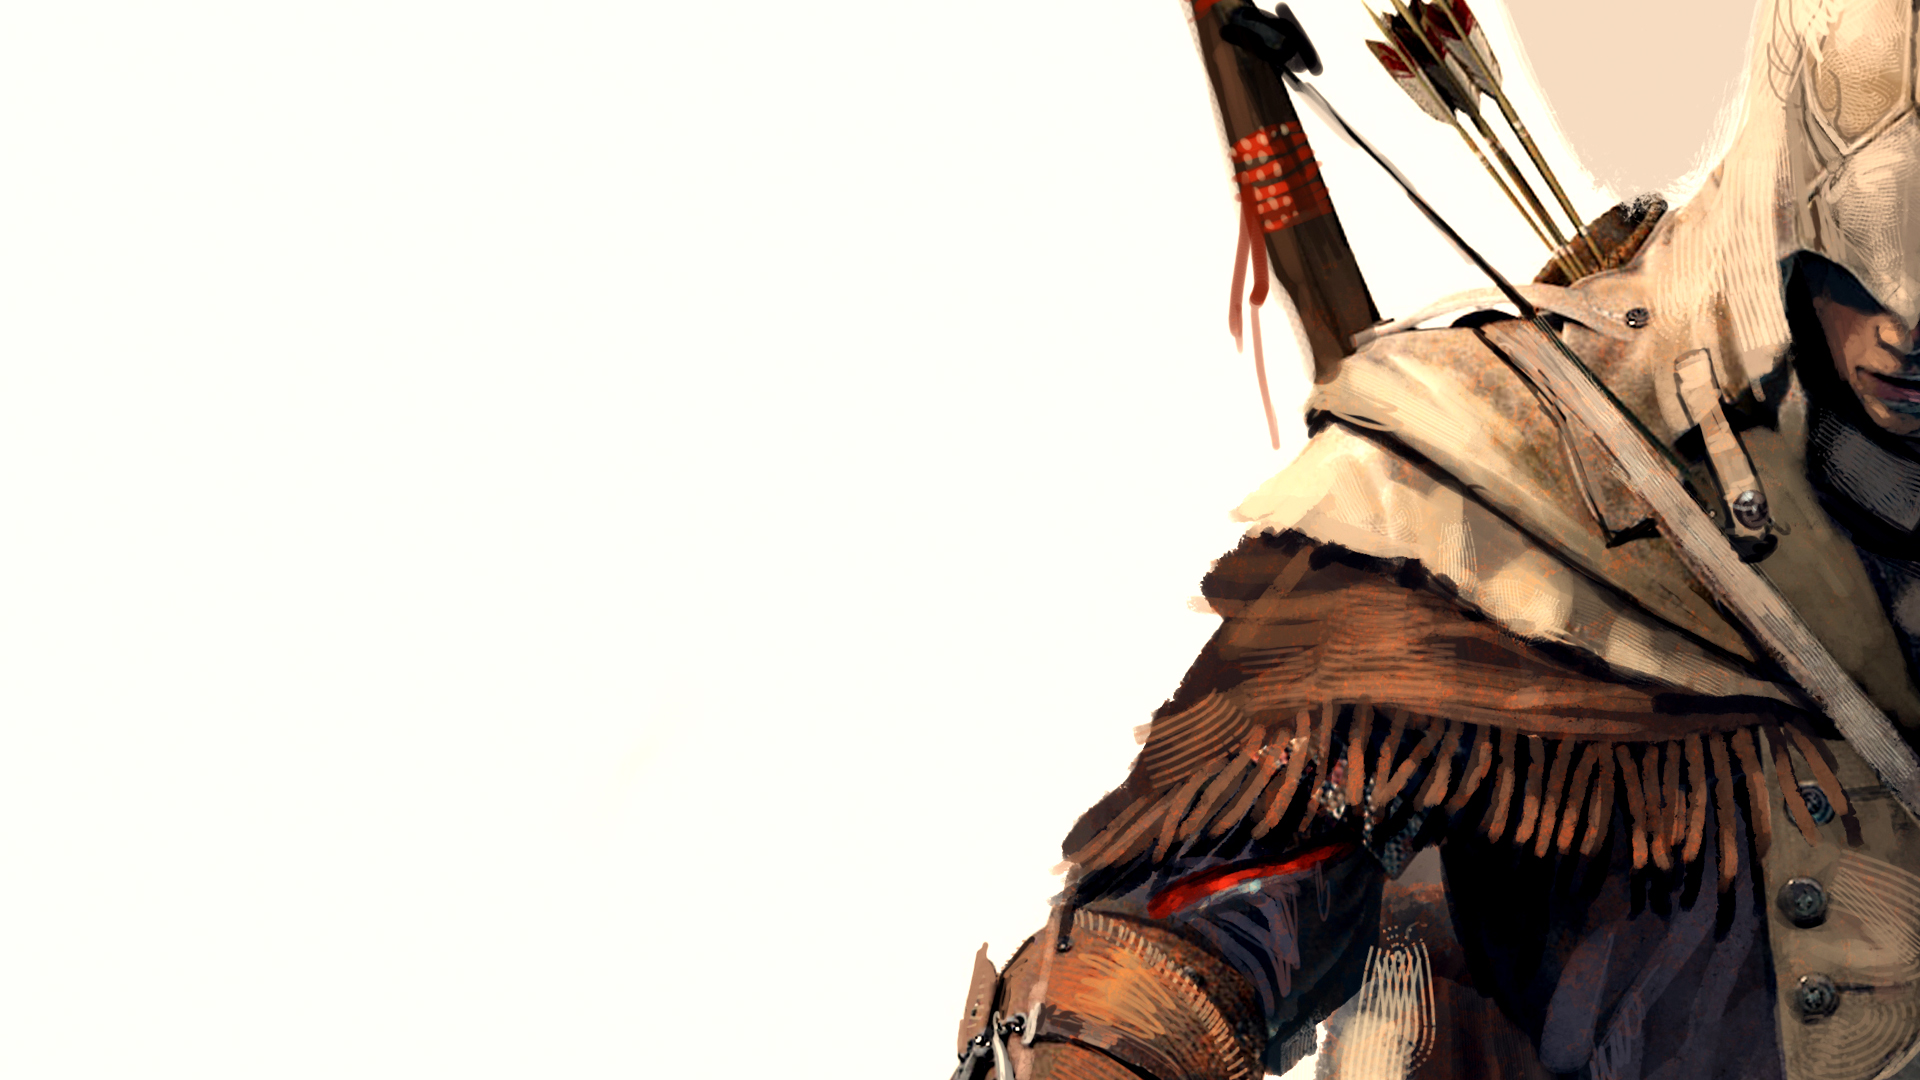 Video Game Assassin 039 S Creed Iii 1920x1080